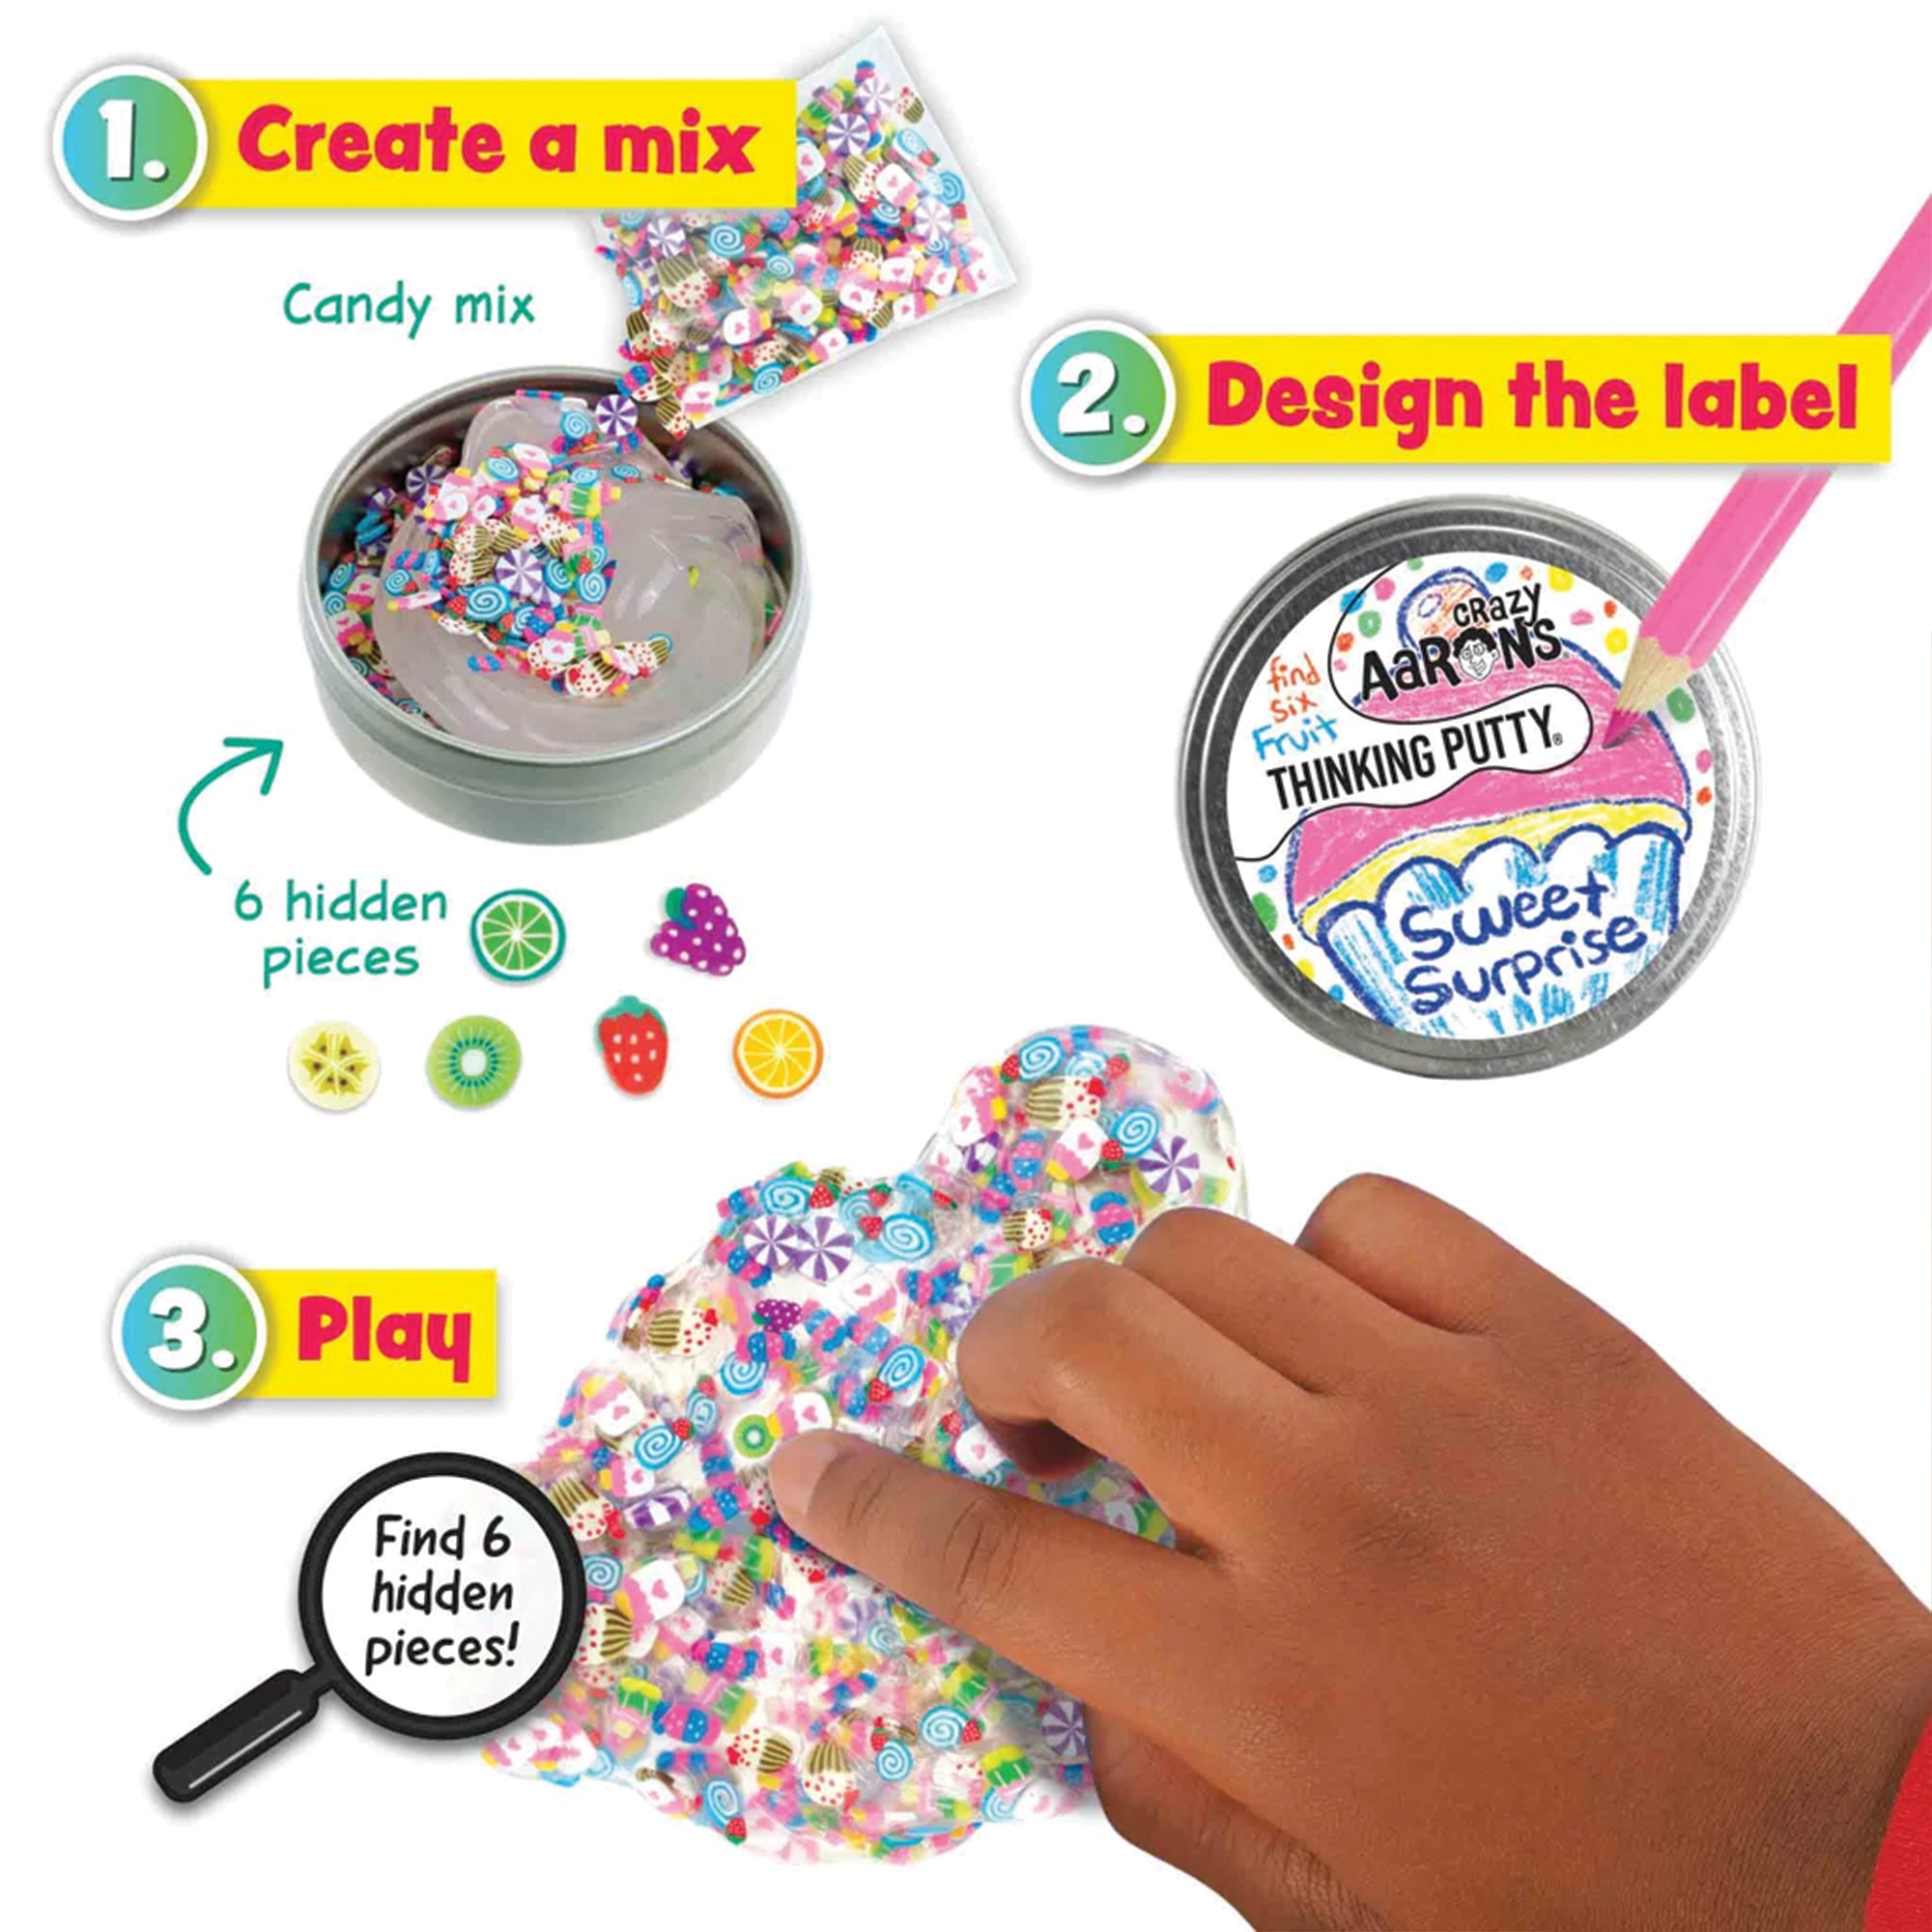 Mixed By Me Hide Inside Thinking Putty Kit. The image shows 3 how to steps. 1, create a mix. You mix the candy and fruit pieces inside the clear putty in the tin. 2, design the label. It shows a pink colored pencil drawing a cupcake on the label on the tin lid with the words “sweet surprise.” 3, play. It shows a hand playing with the mixed putty, pointing out a kiwi fruit among the candy pieces. A magnifying glass in the lower-left directs you to “find 6 hidden pieces.” 